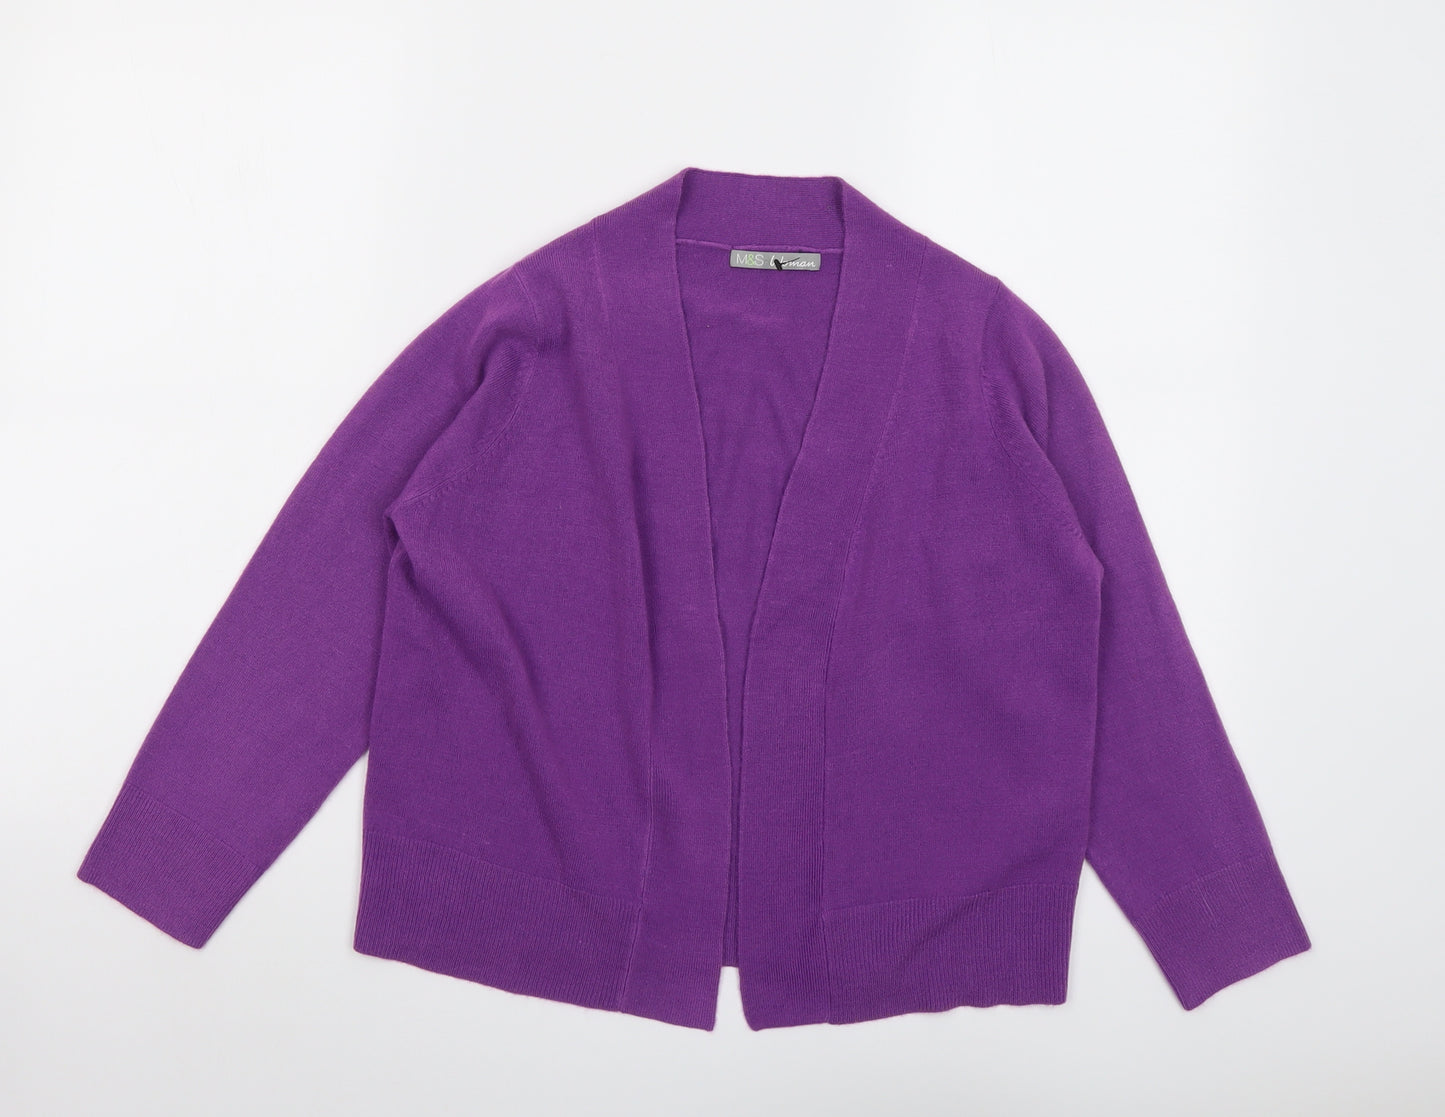 Marks and Spencer Womens Purple V-Neck Acrylic Cardigan Jumper Size 10